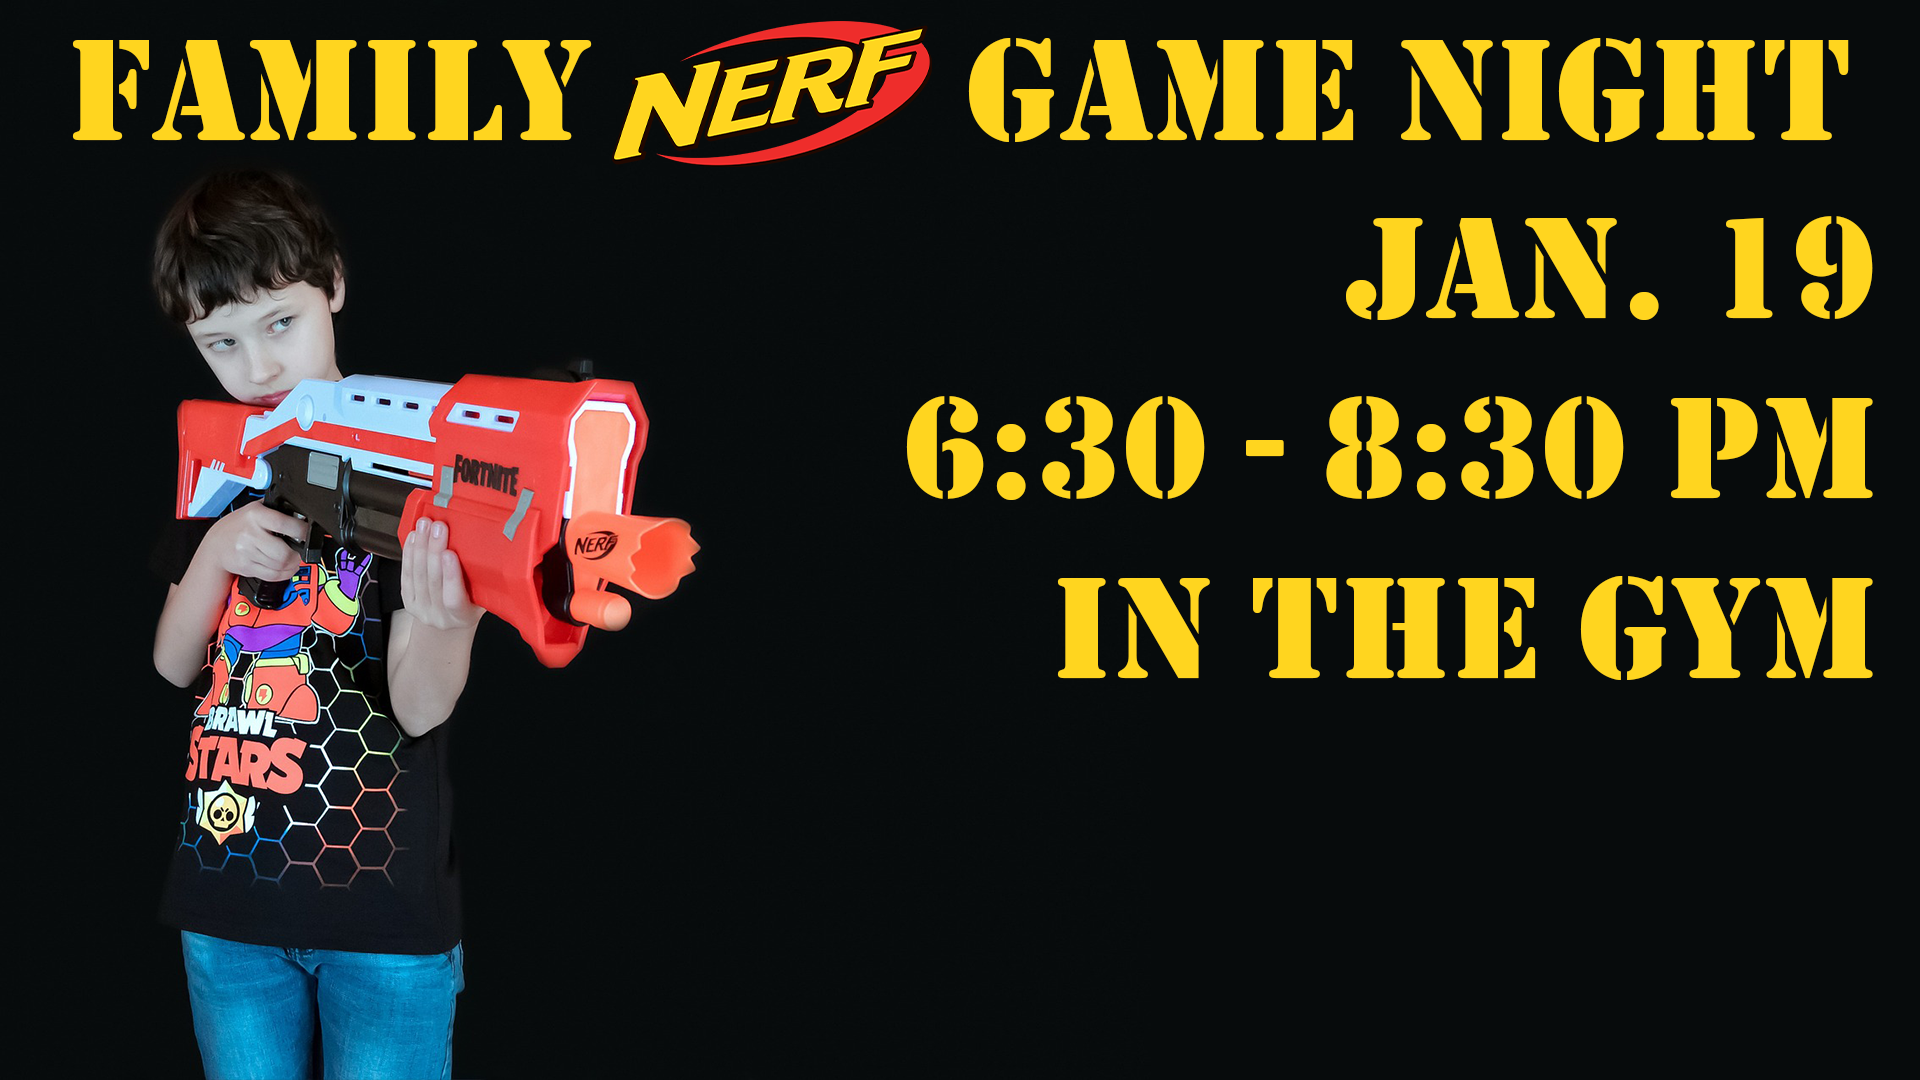 Family Nerf Game Night on January 19 in the Gym - Fee Fee Baptist Church